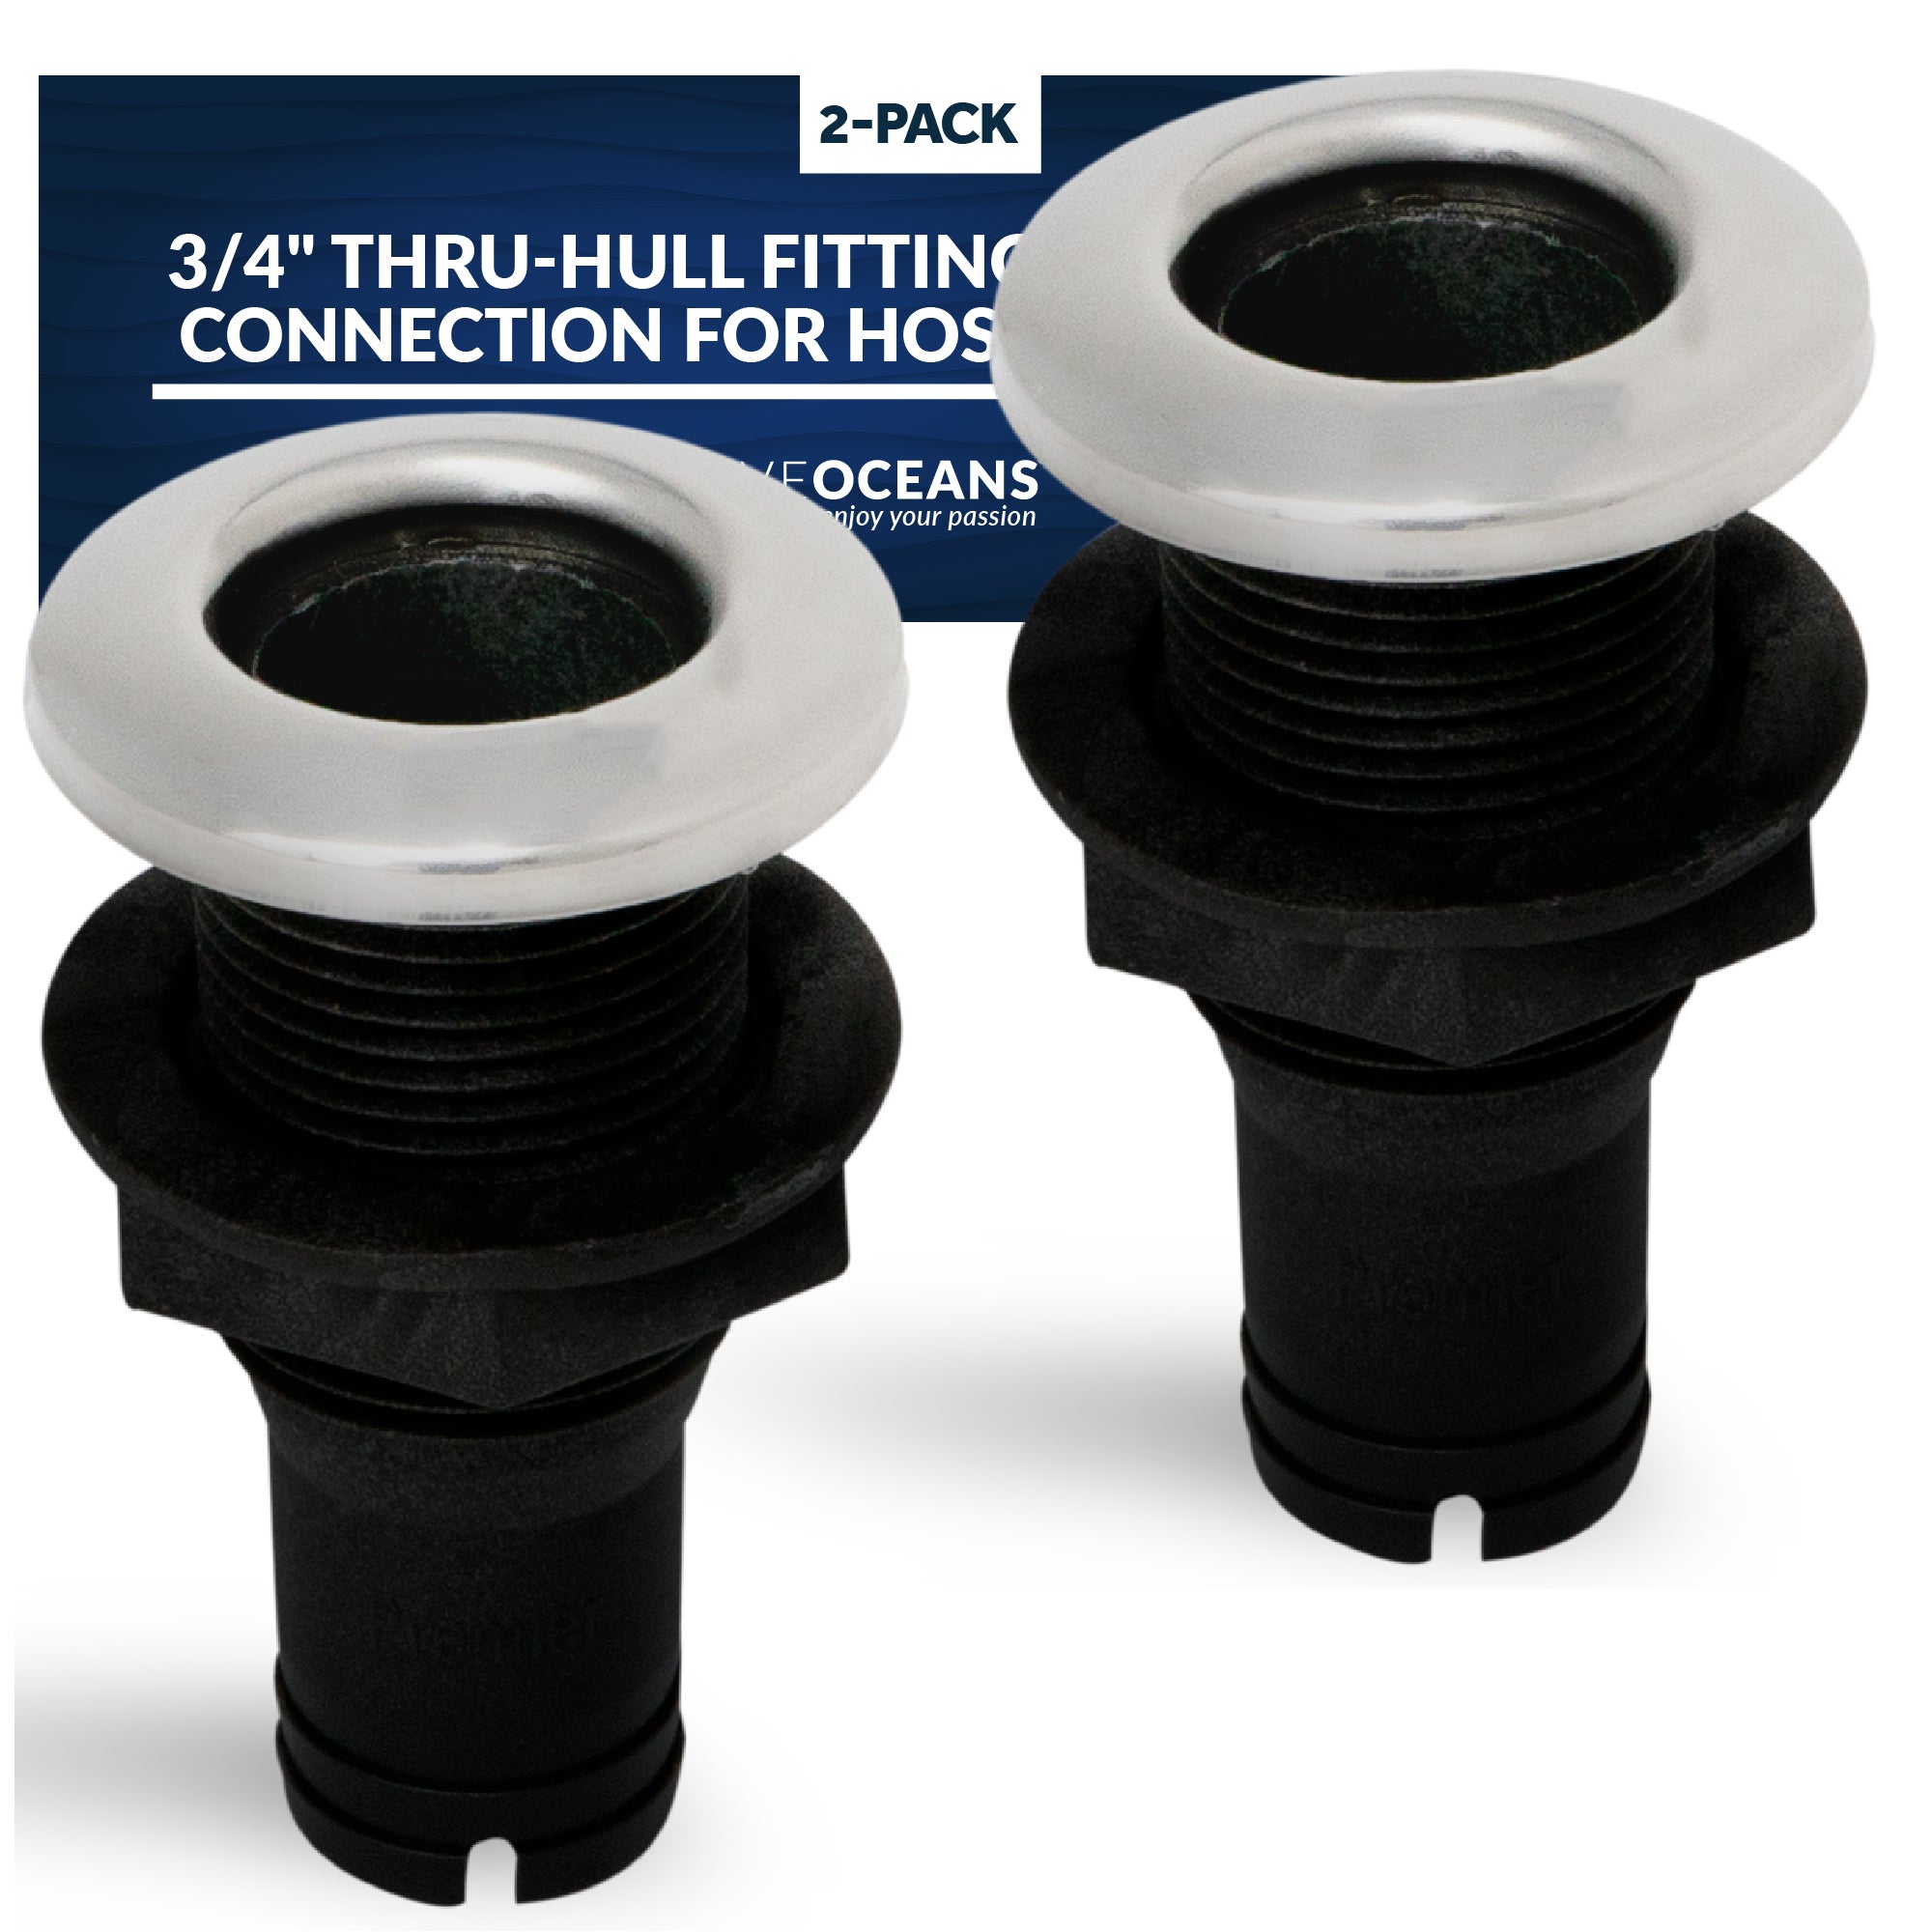 Thru-Hull Fitting Connection for Hose, 3/4" Black, 2-Pack - FO2995-M2